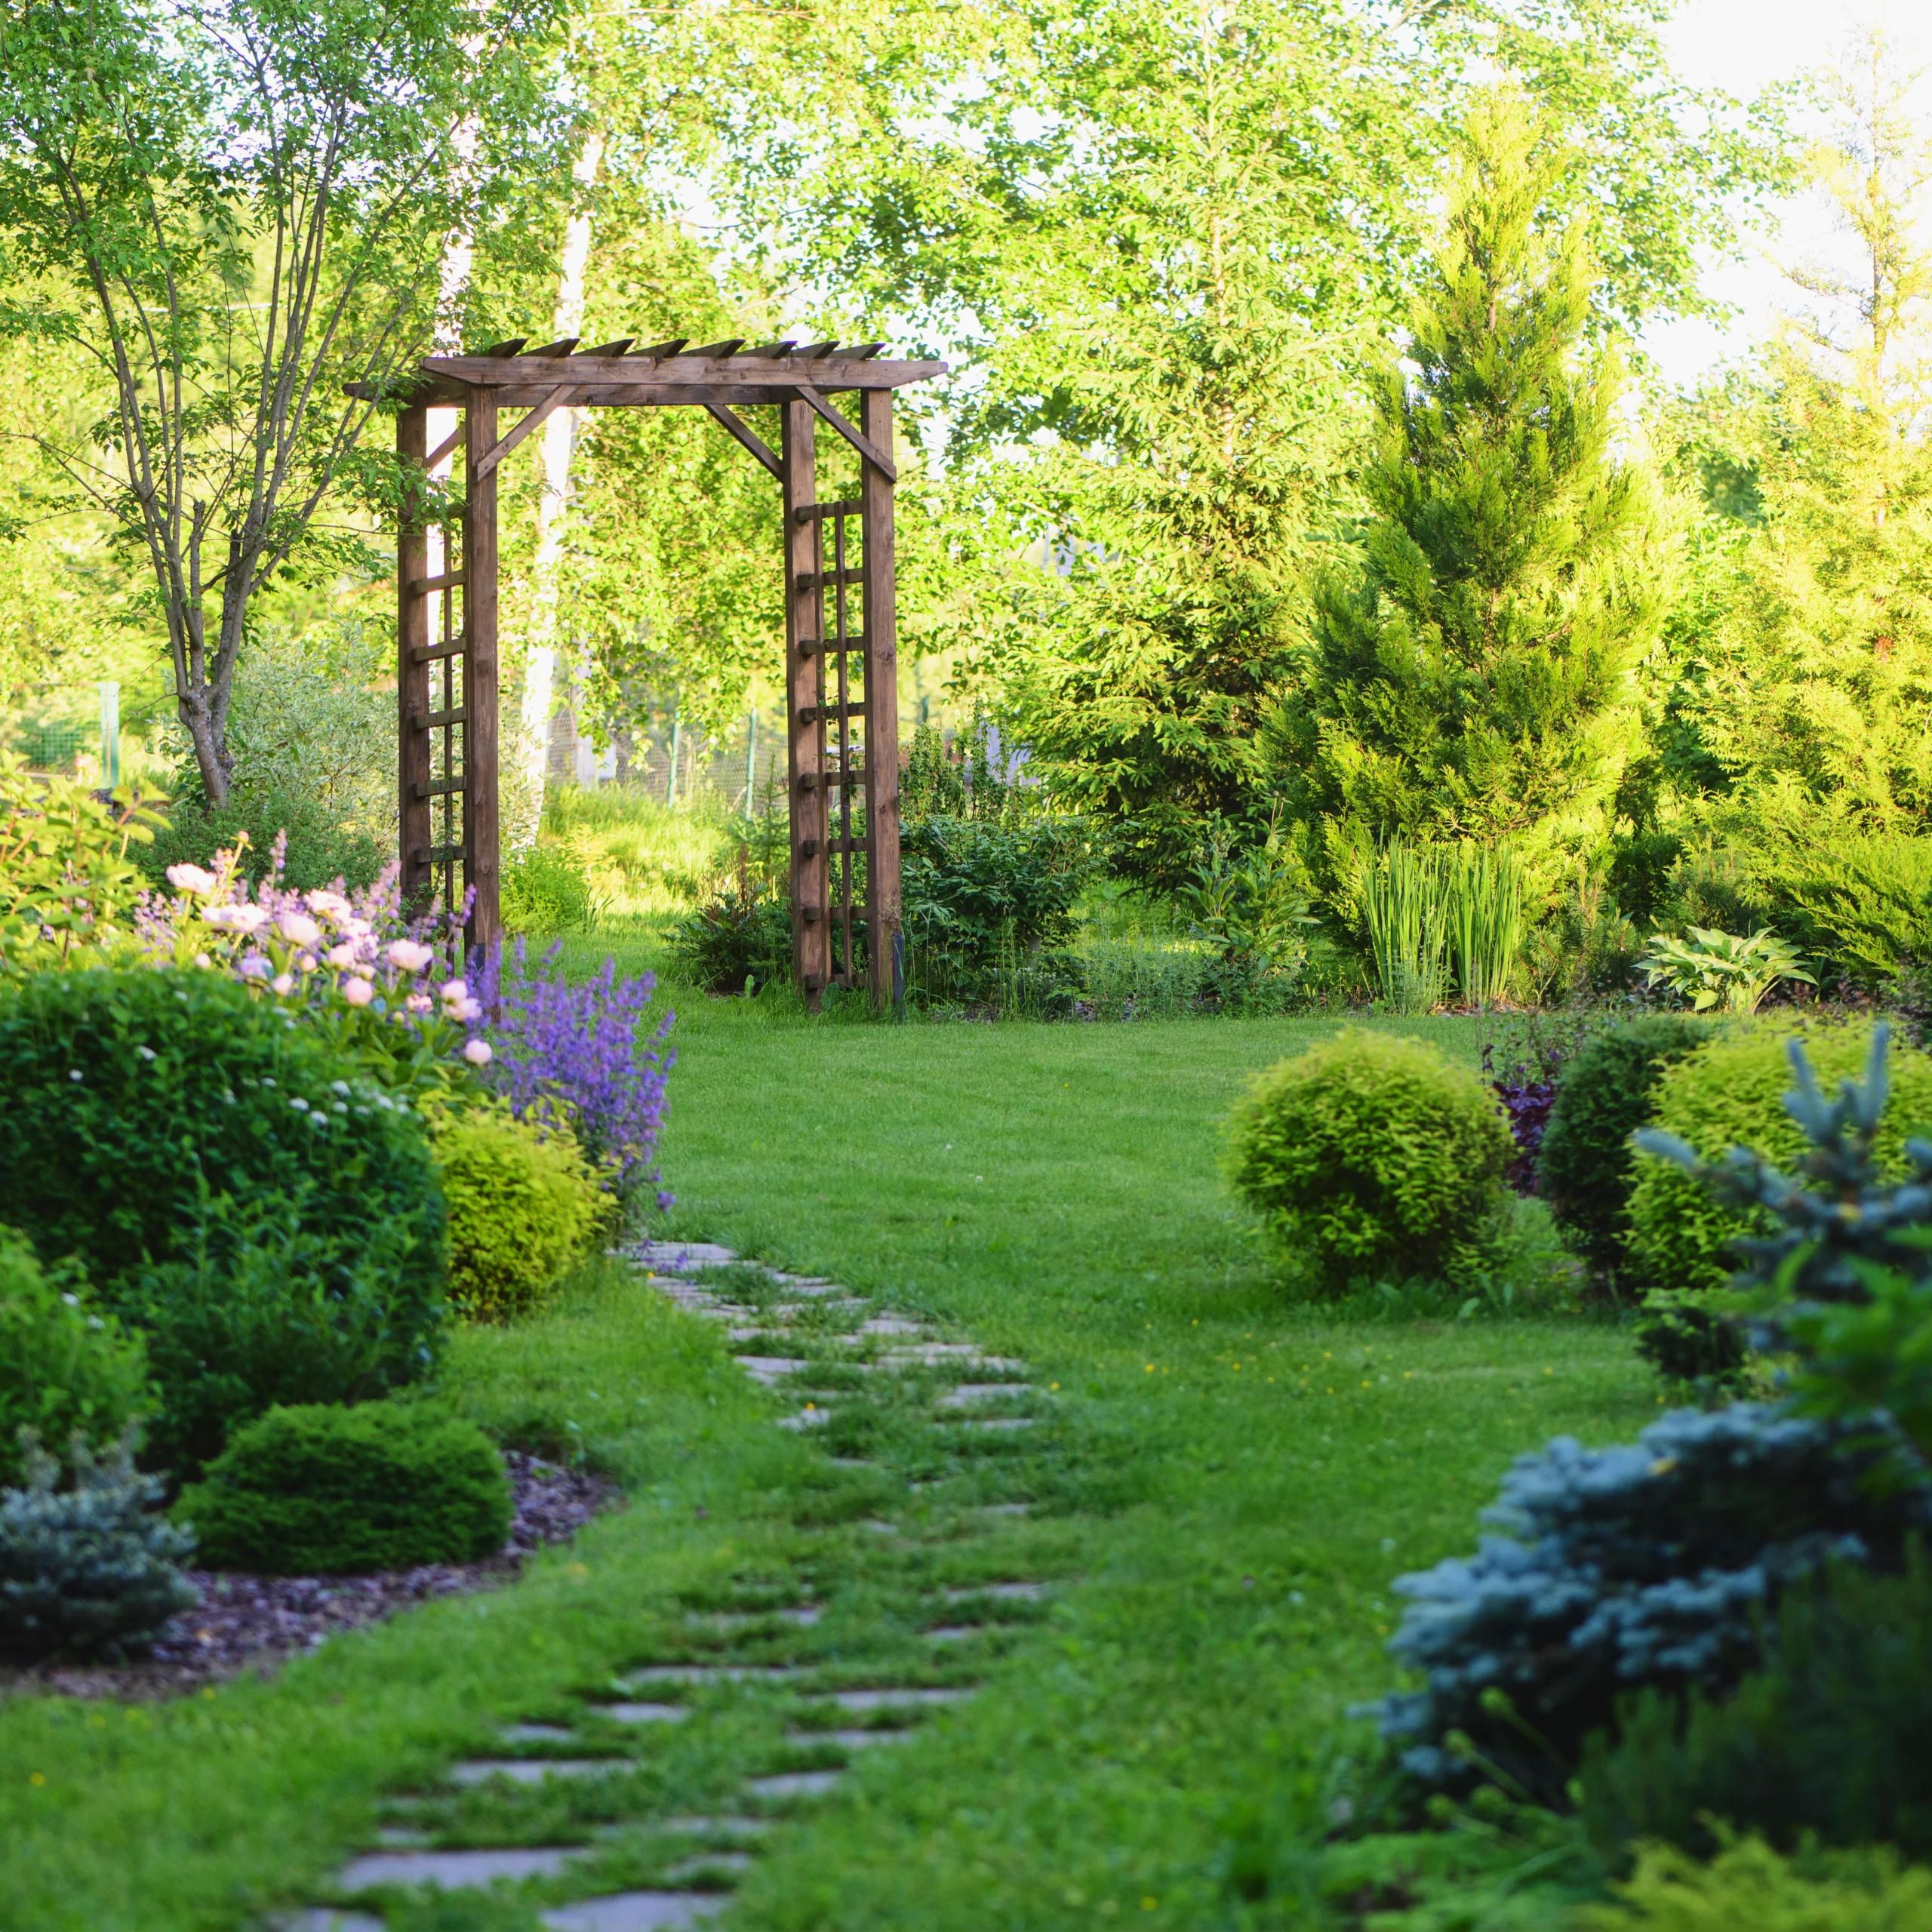 Rustic wooden arbor over a garden path surrounded by lush greenery and blooming flowers.